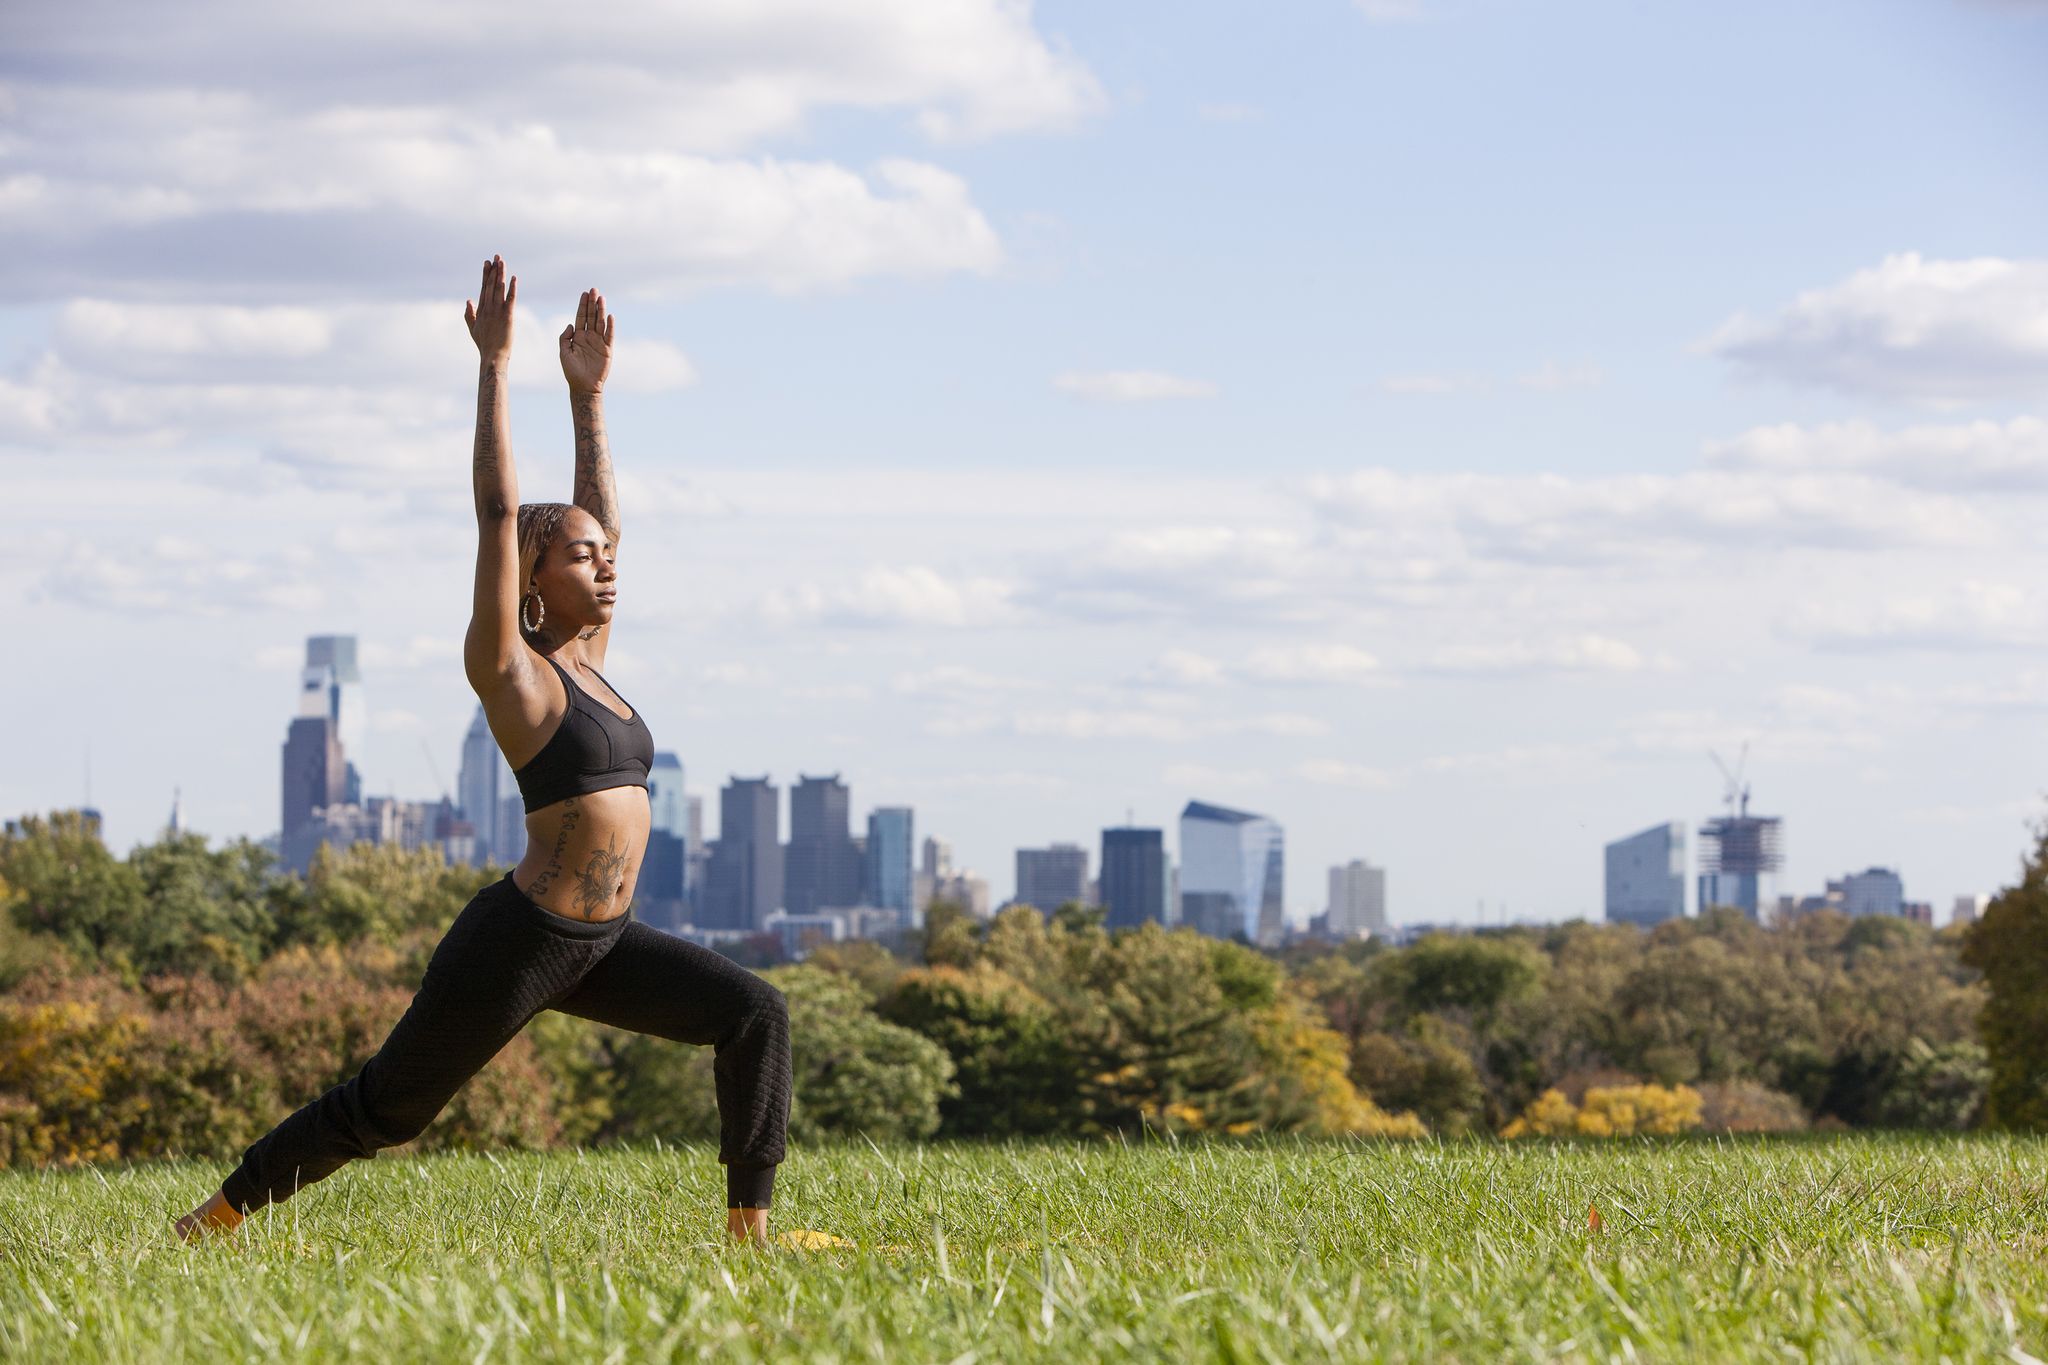 Side view of young woman on grass in yoga position, arms raised, eyes closed, Philadelphia, Pennsylvania, USA